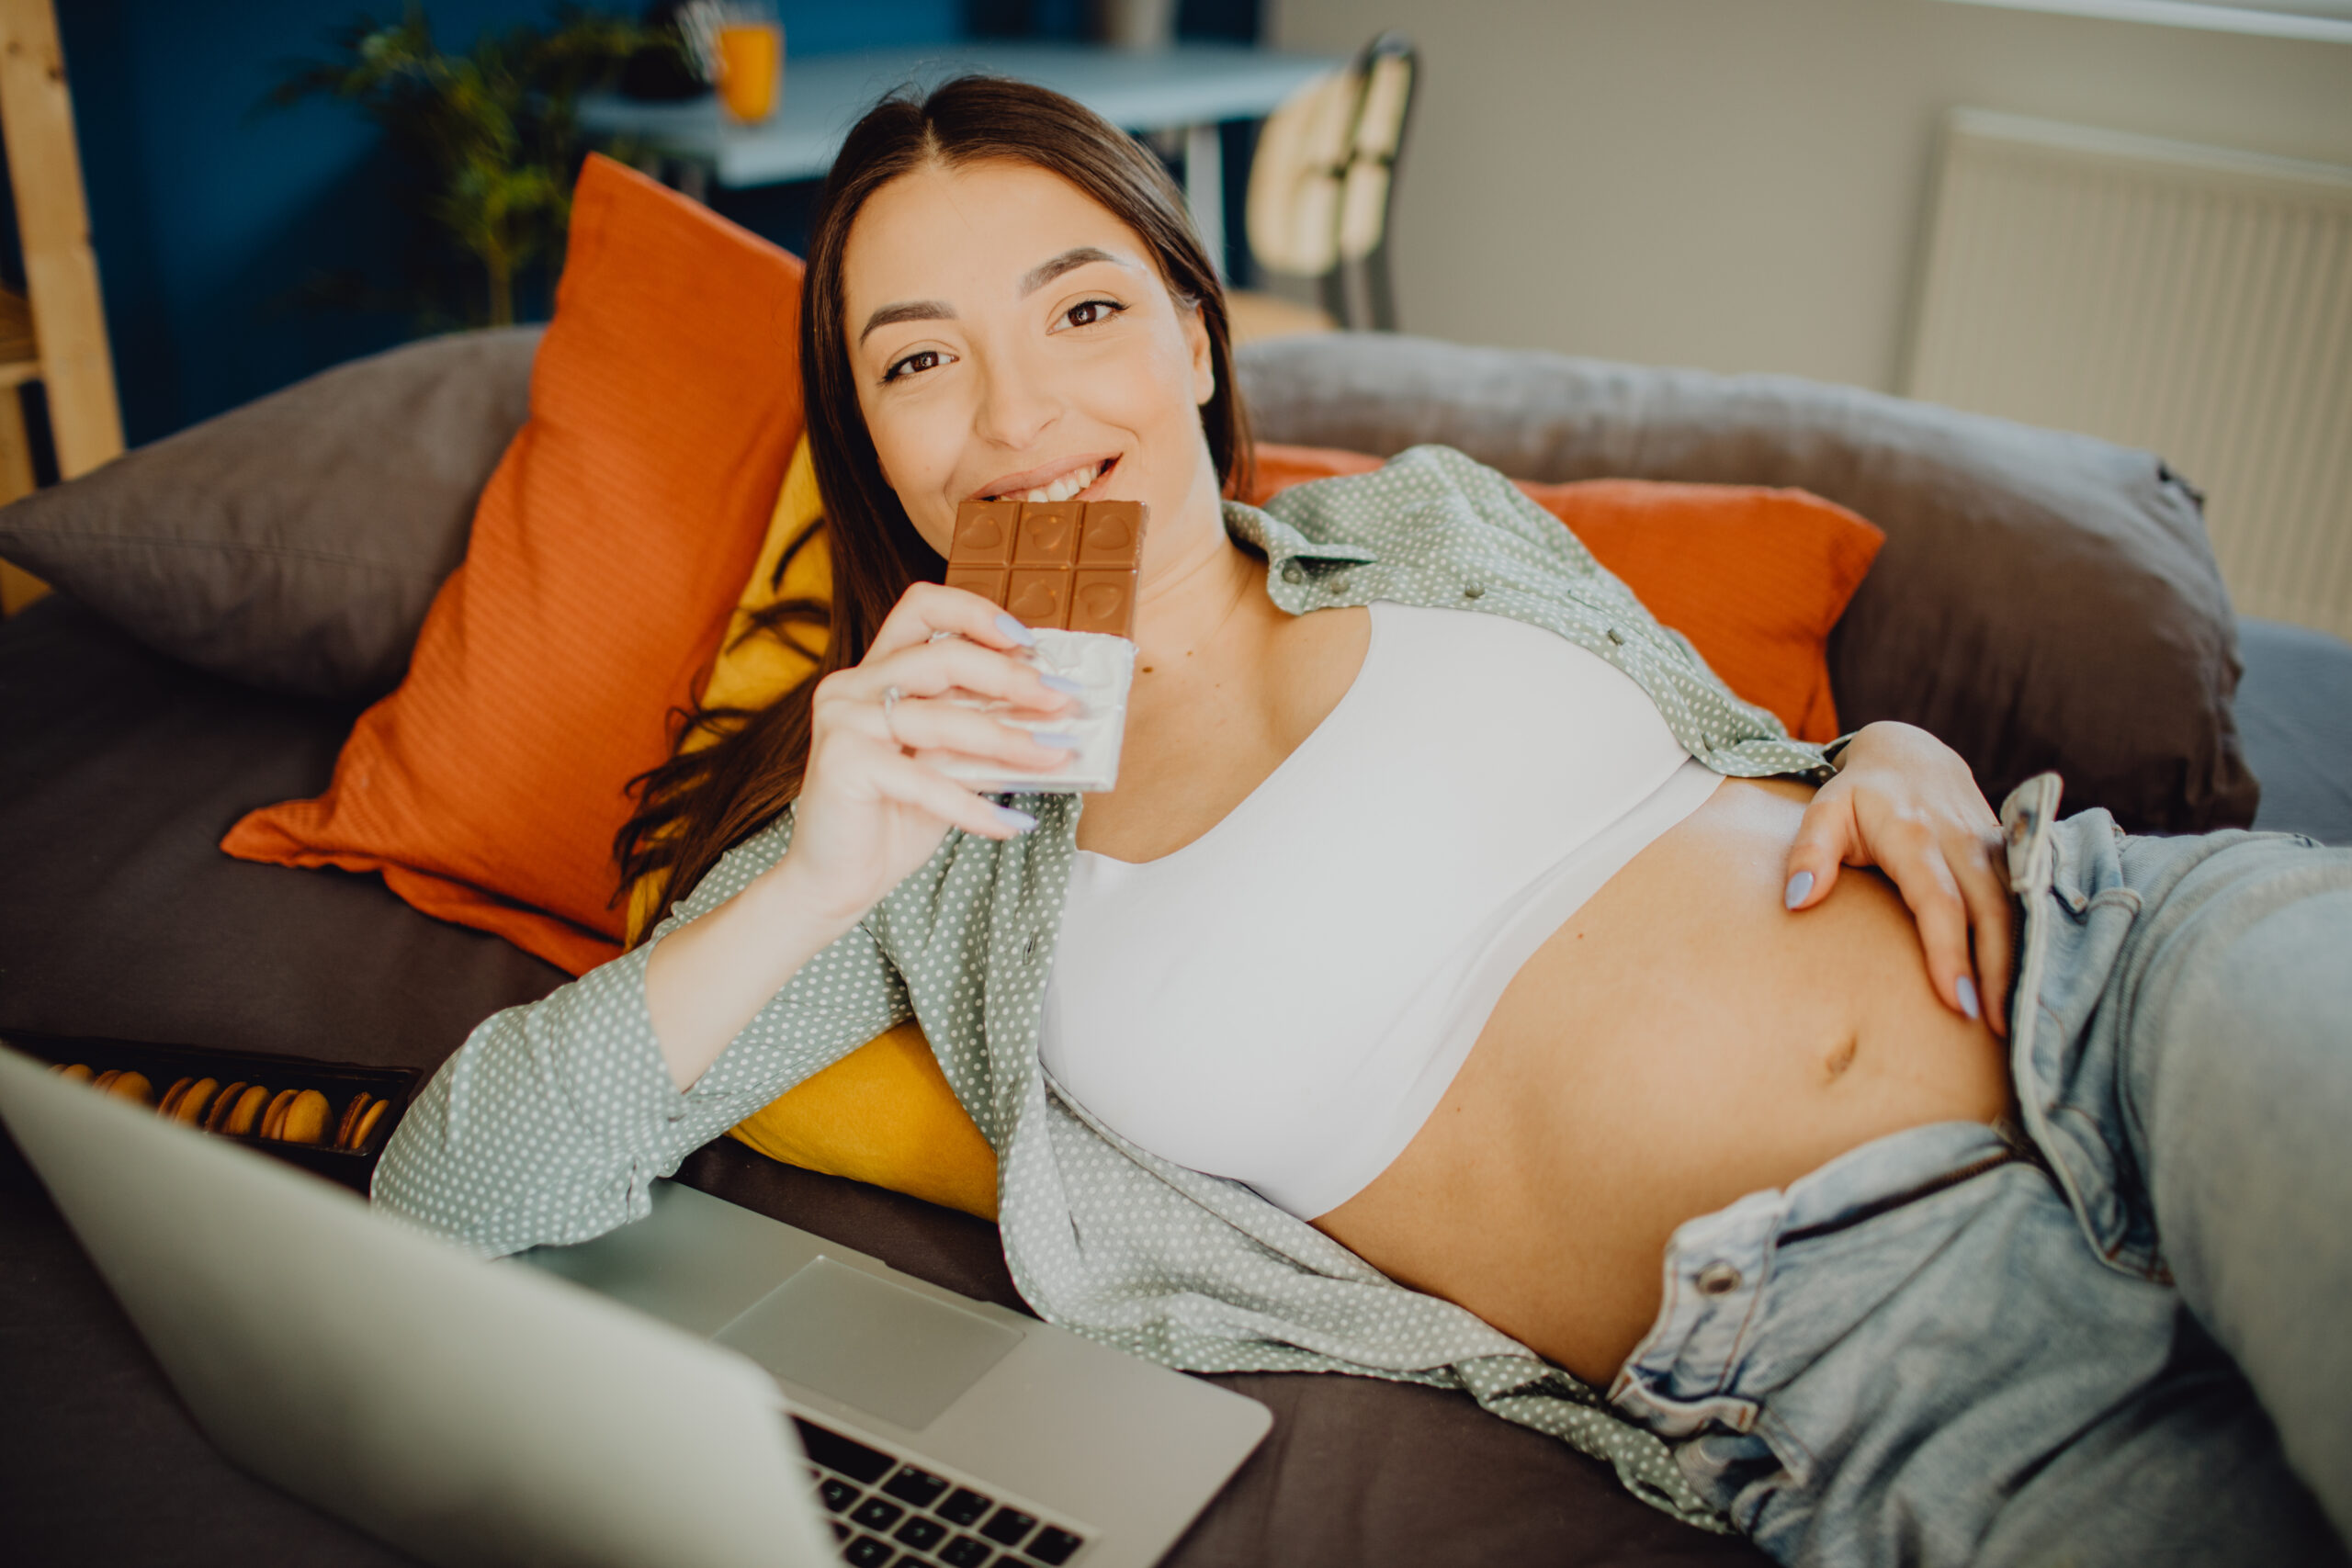 Portrait of a pregnant woman eating chocolate while relaxing in her bed